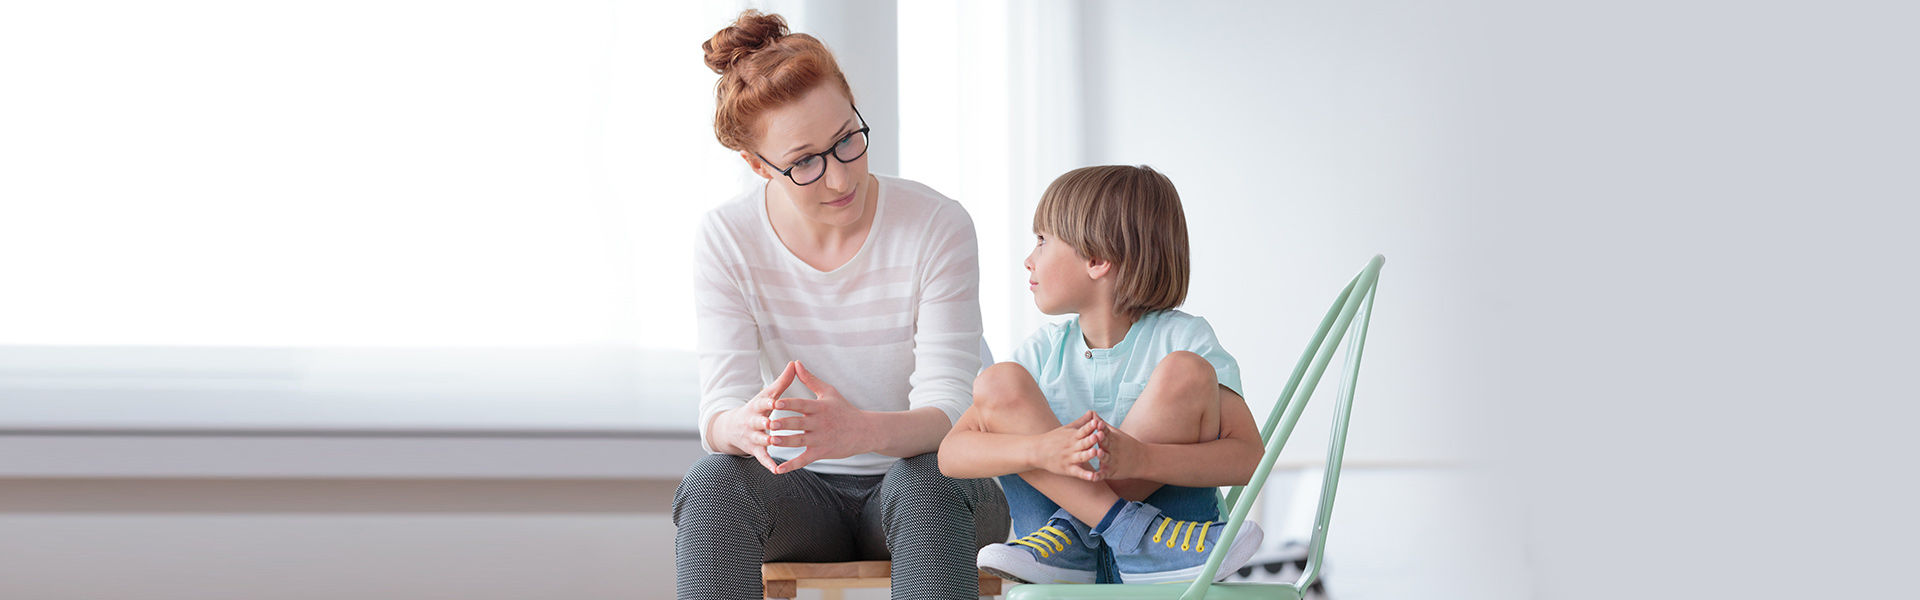 How to Choose a Psychiatrist for Your Child’s Mental Health